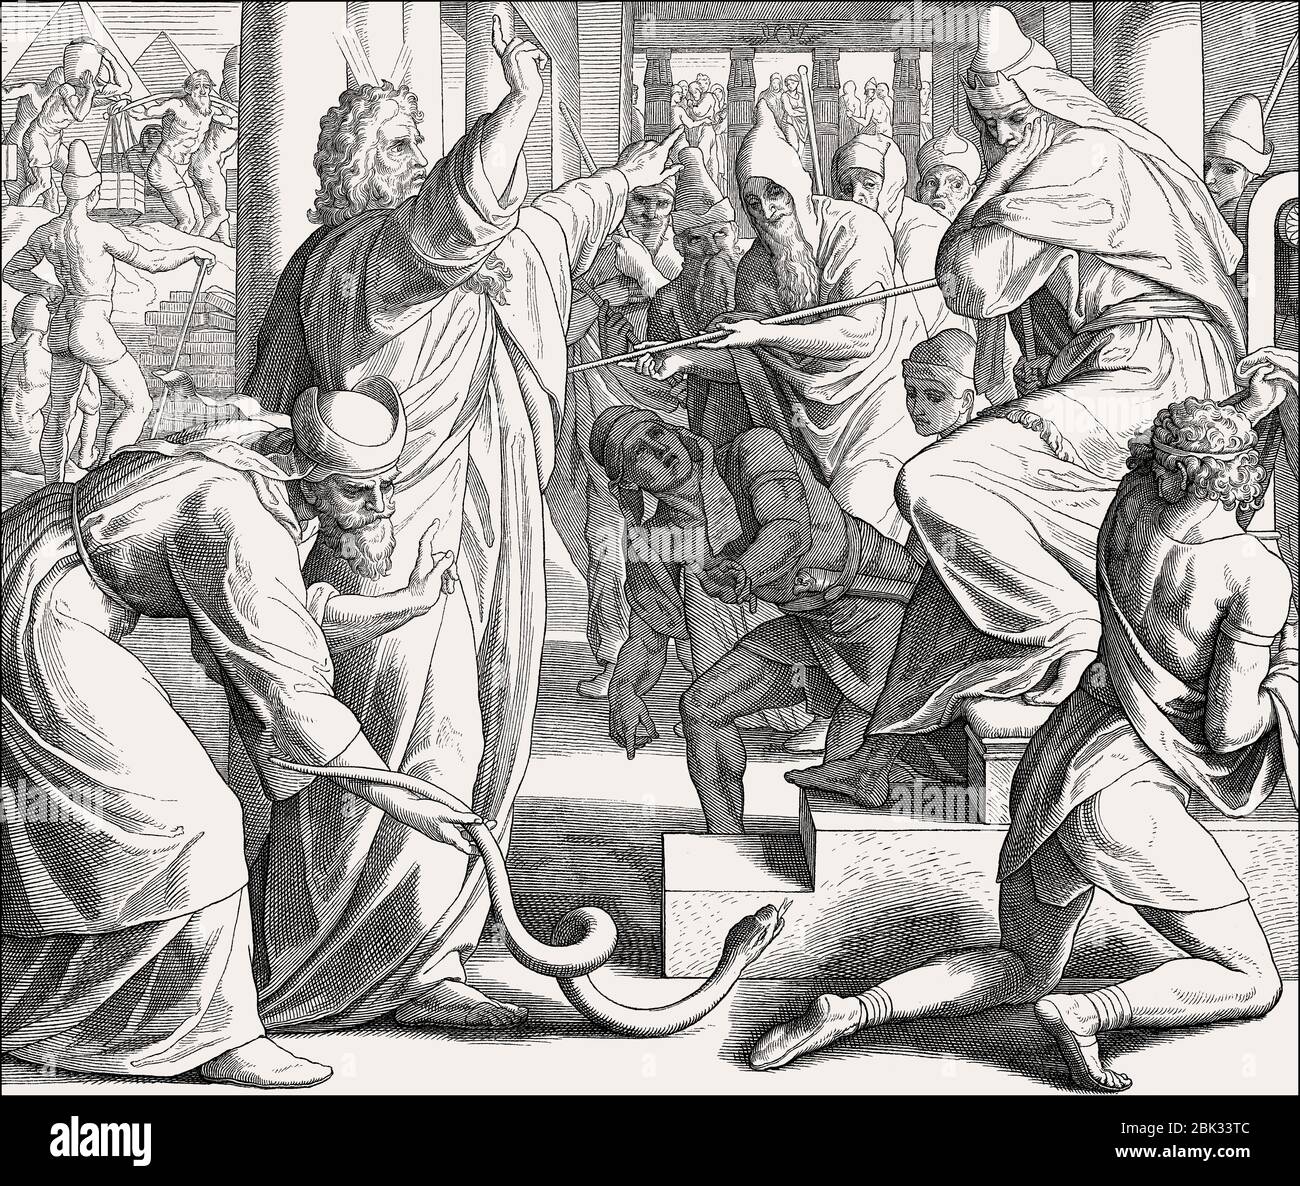 Moses and Aaron Appear before Pharaoh, Staffs to Snakes, Old Testament, by Julius Schnorr von Carolsfeld, 1860 Stock Photo